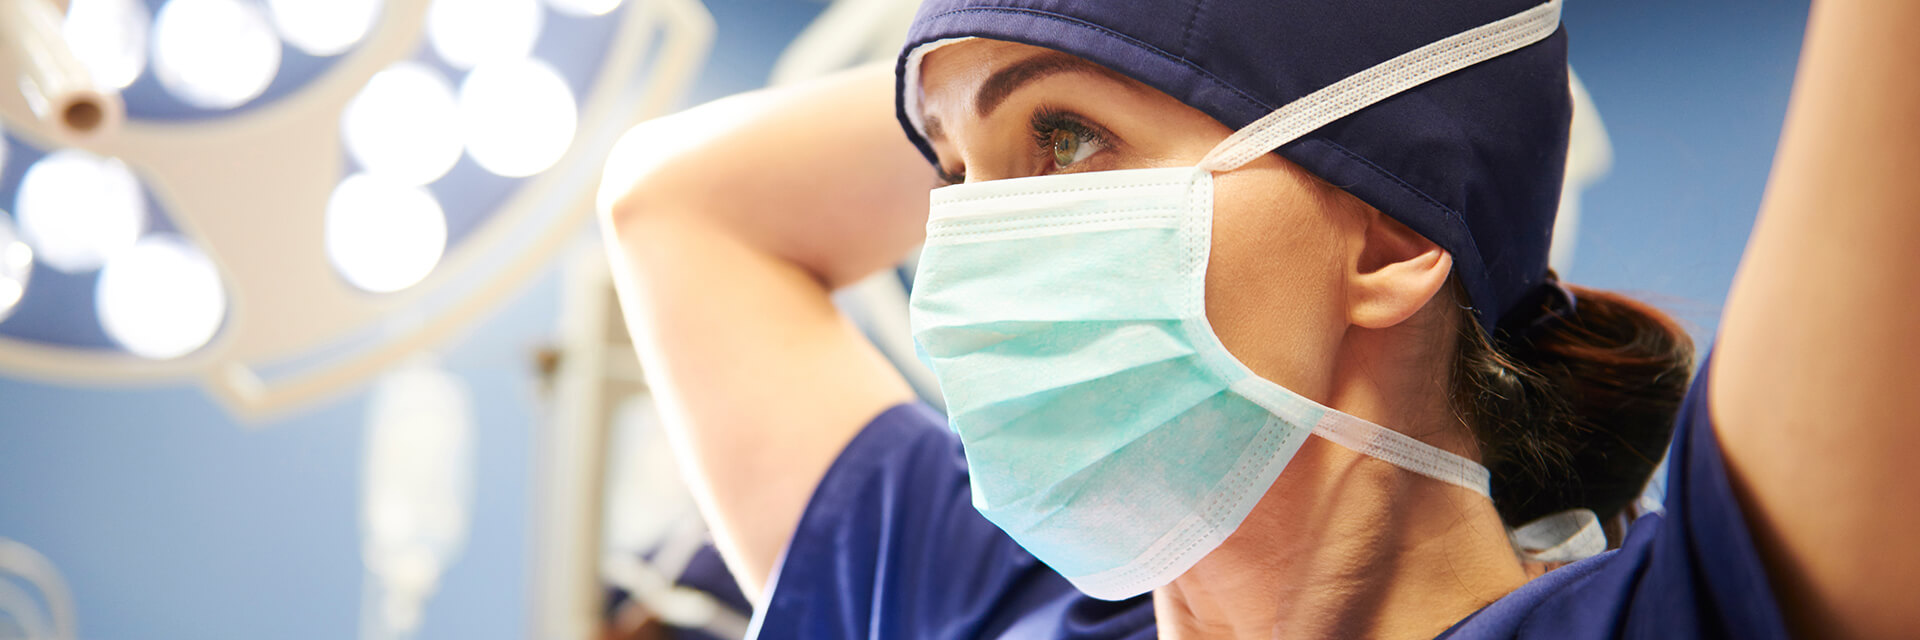 Female doctor with dark hair in blue scrub top putting on a mask